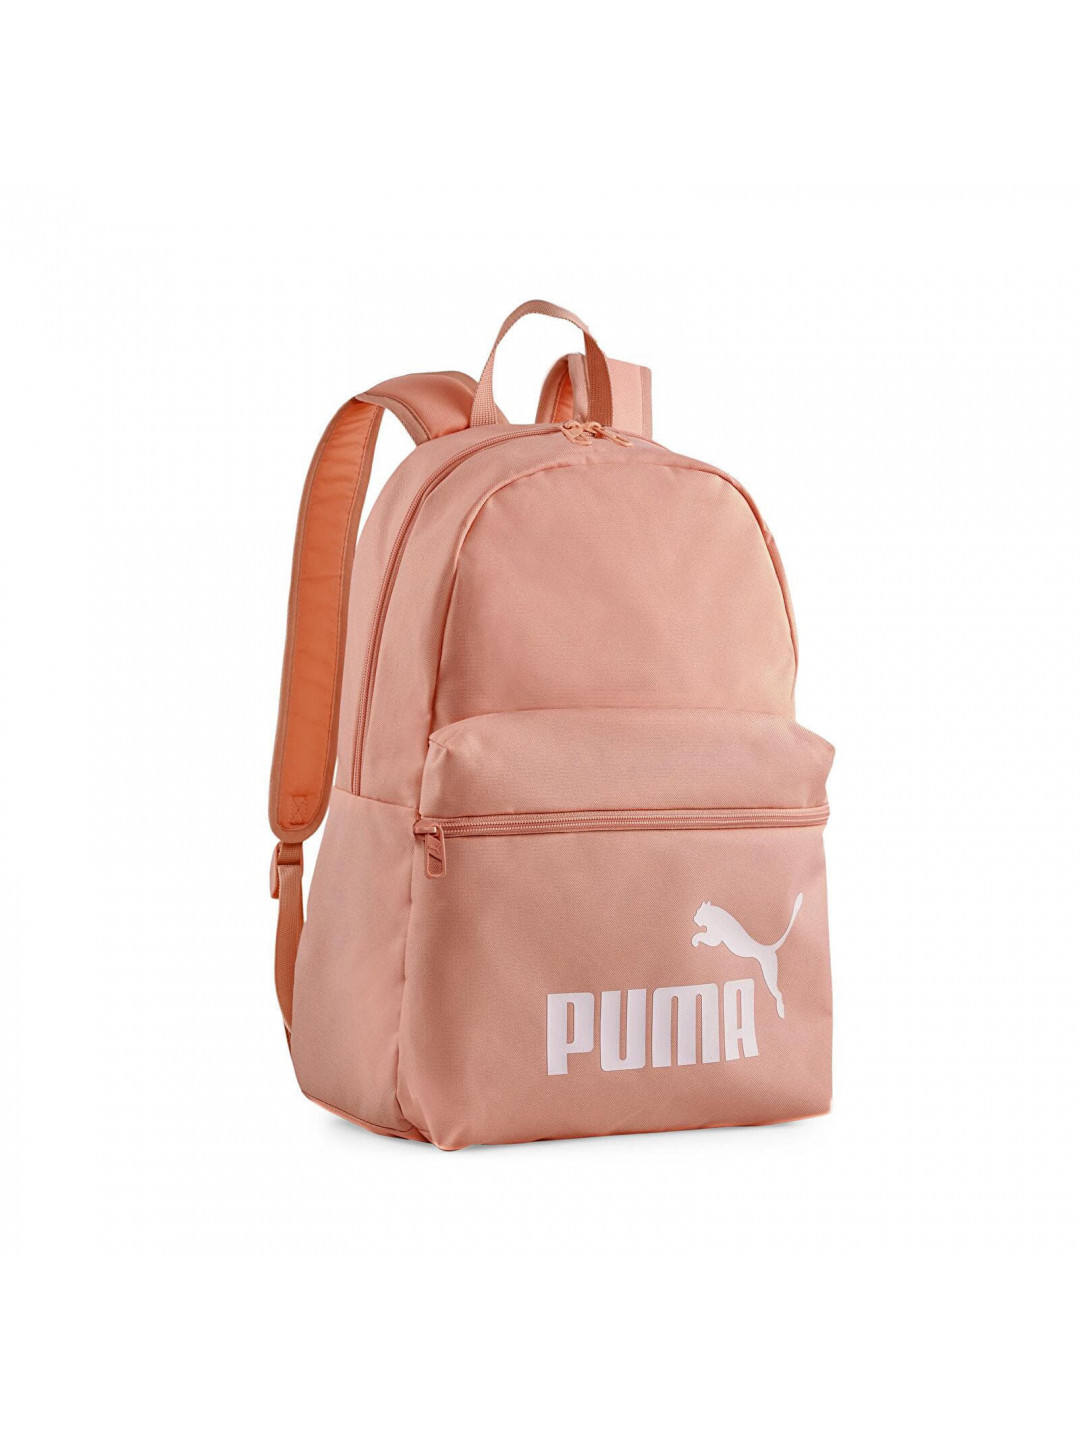 Puma Phase Backpack Peach Smoothie